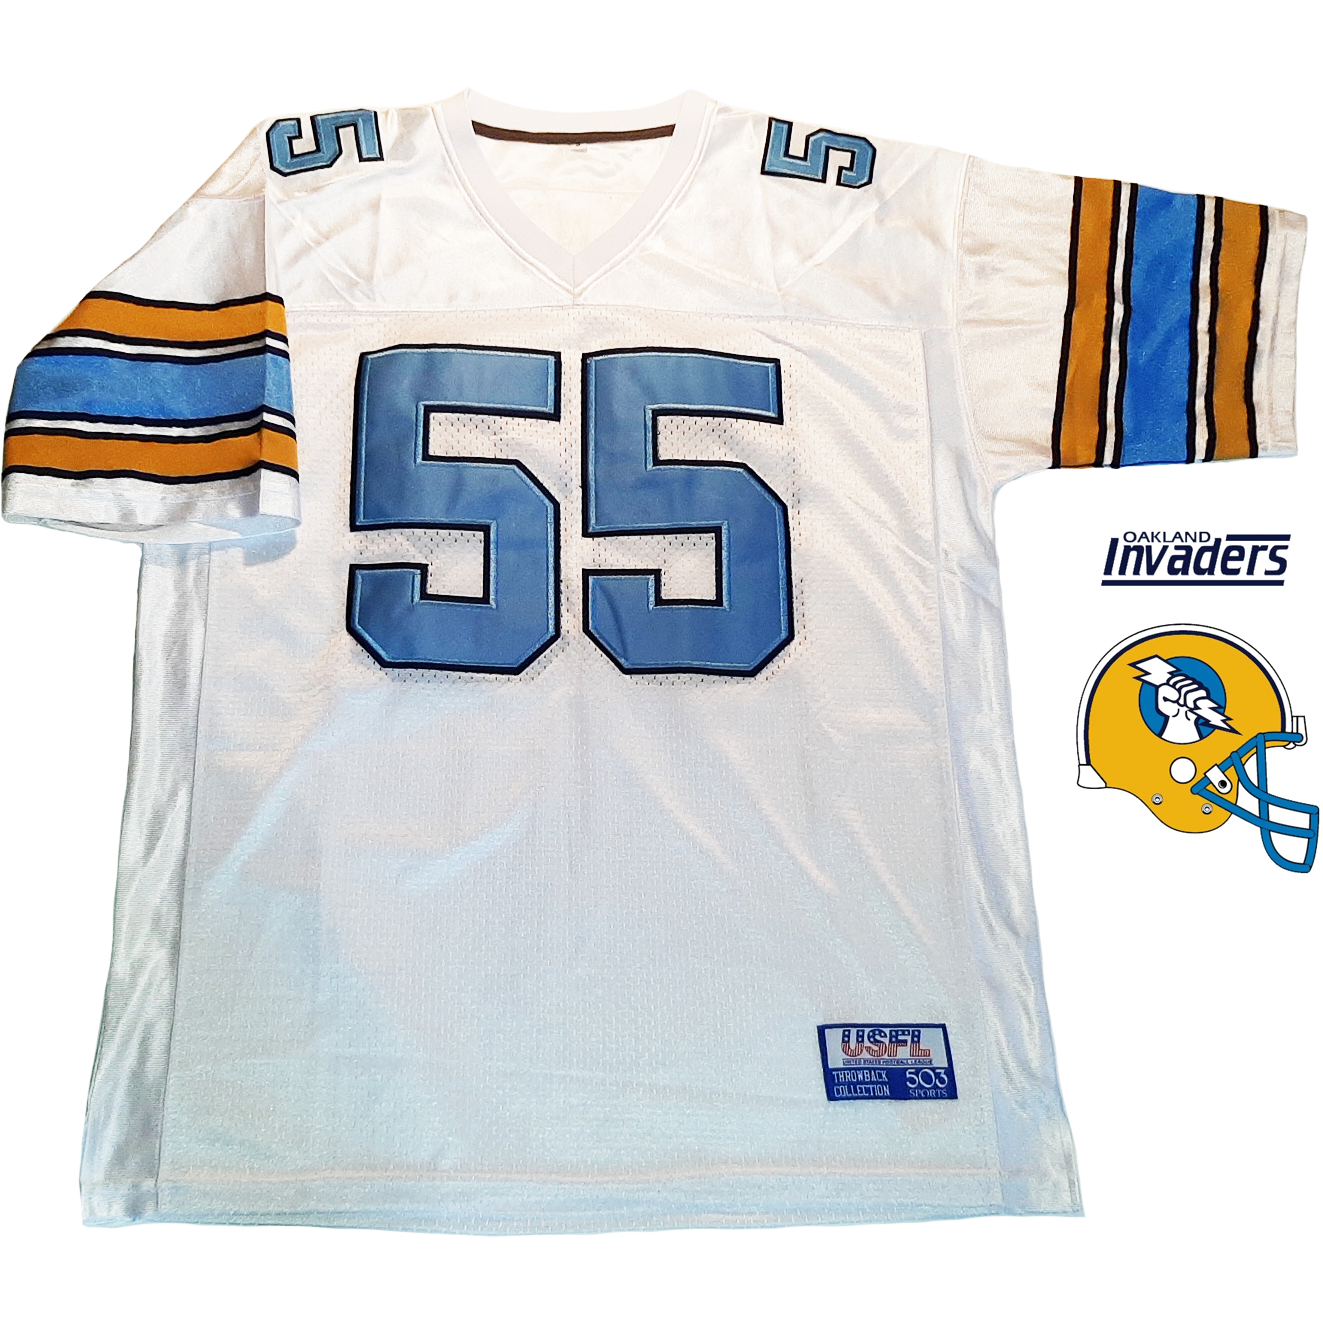 Oakland Invaders USFL Jersey - White - Small - Royal Retros